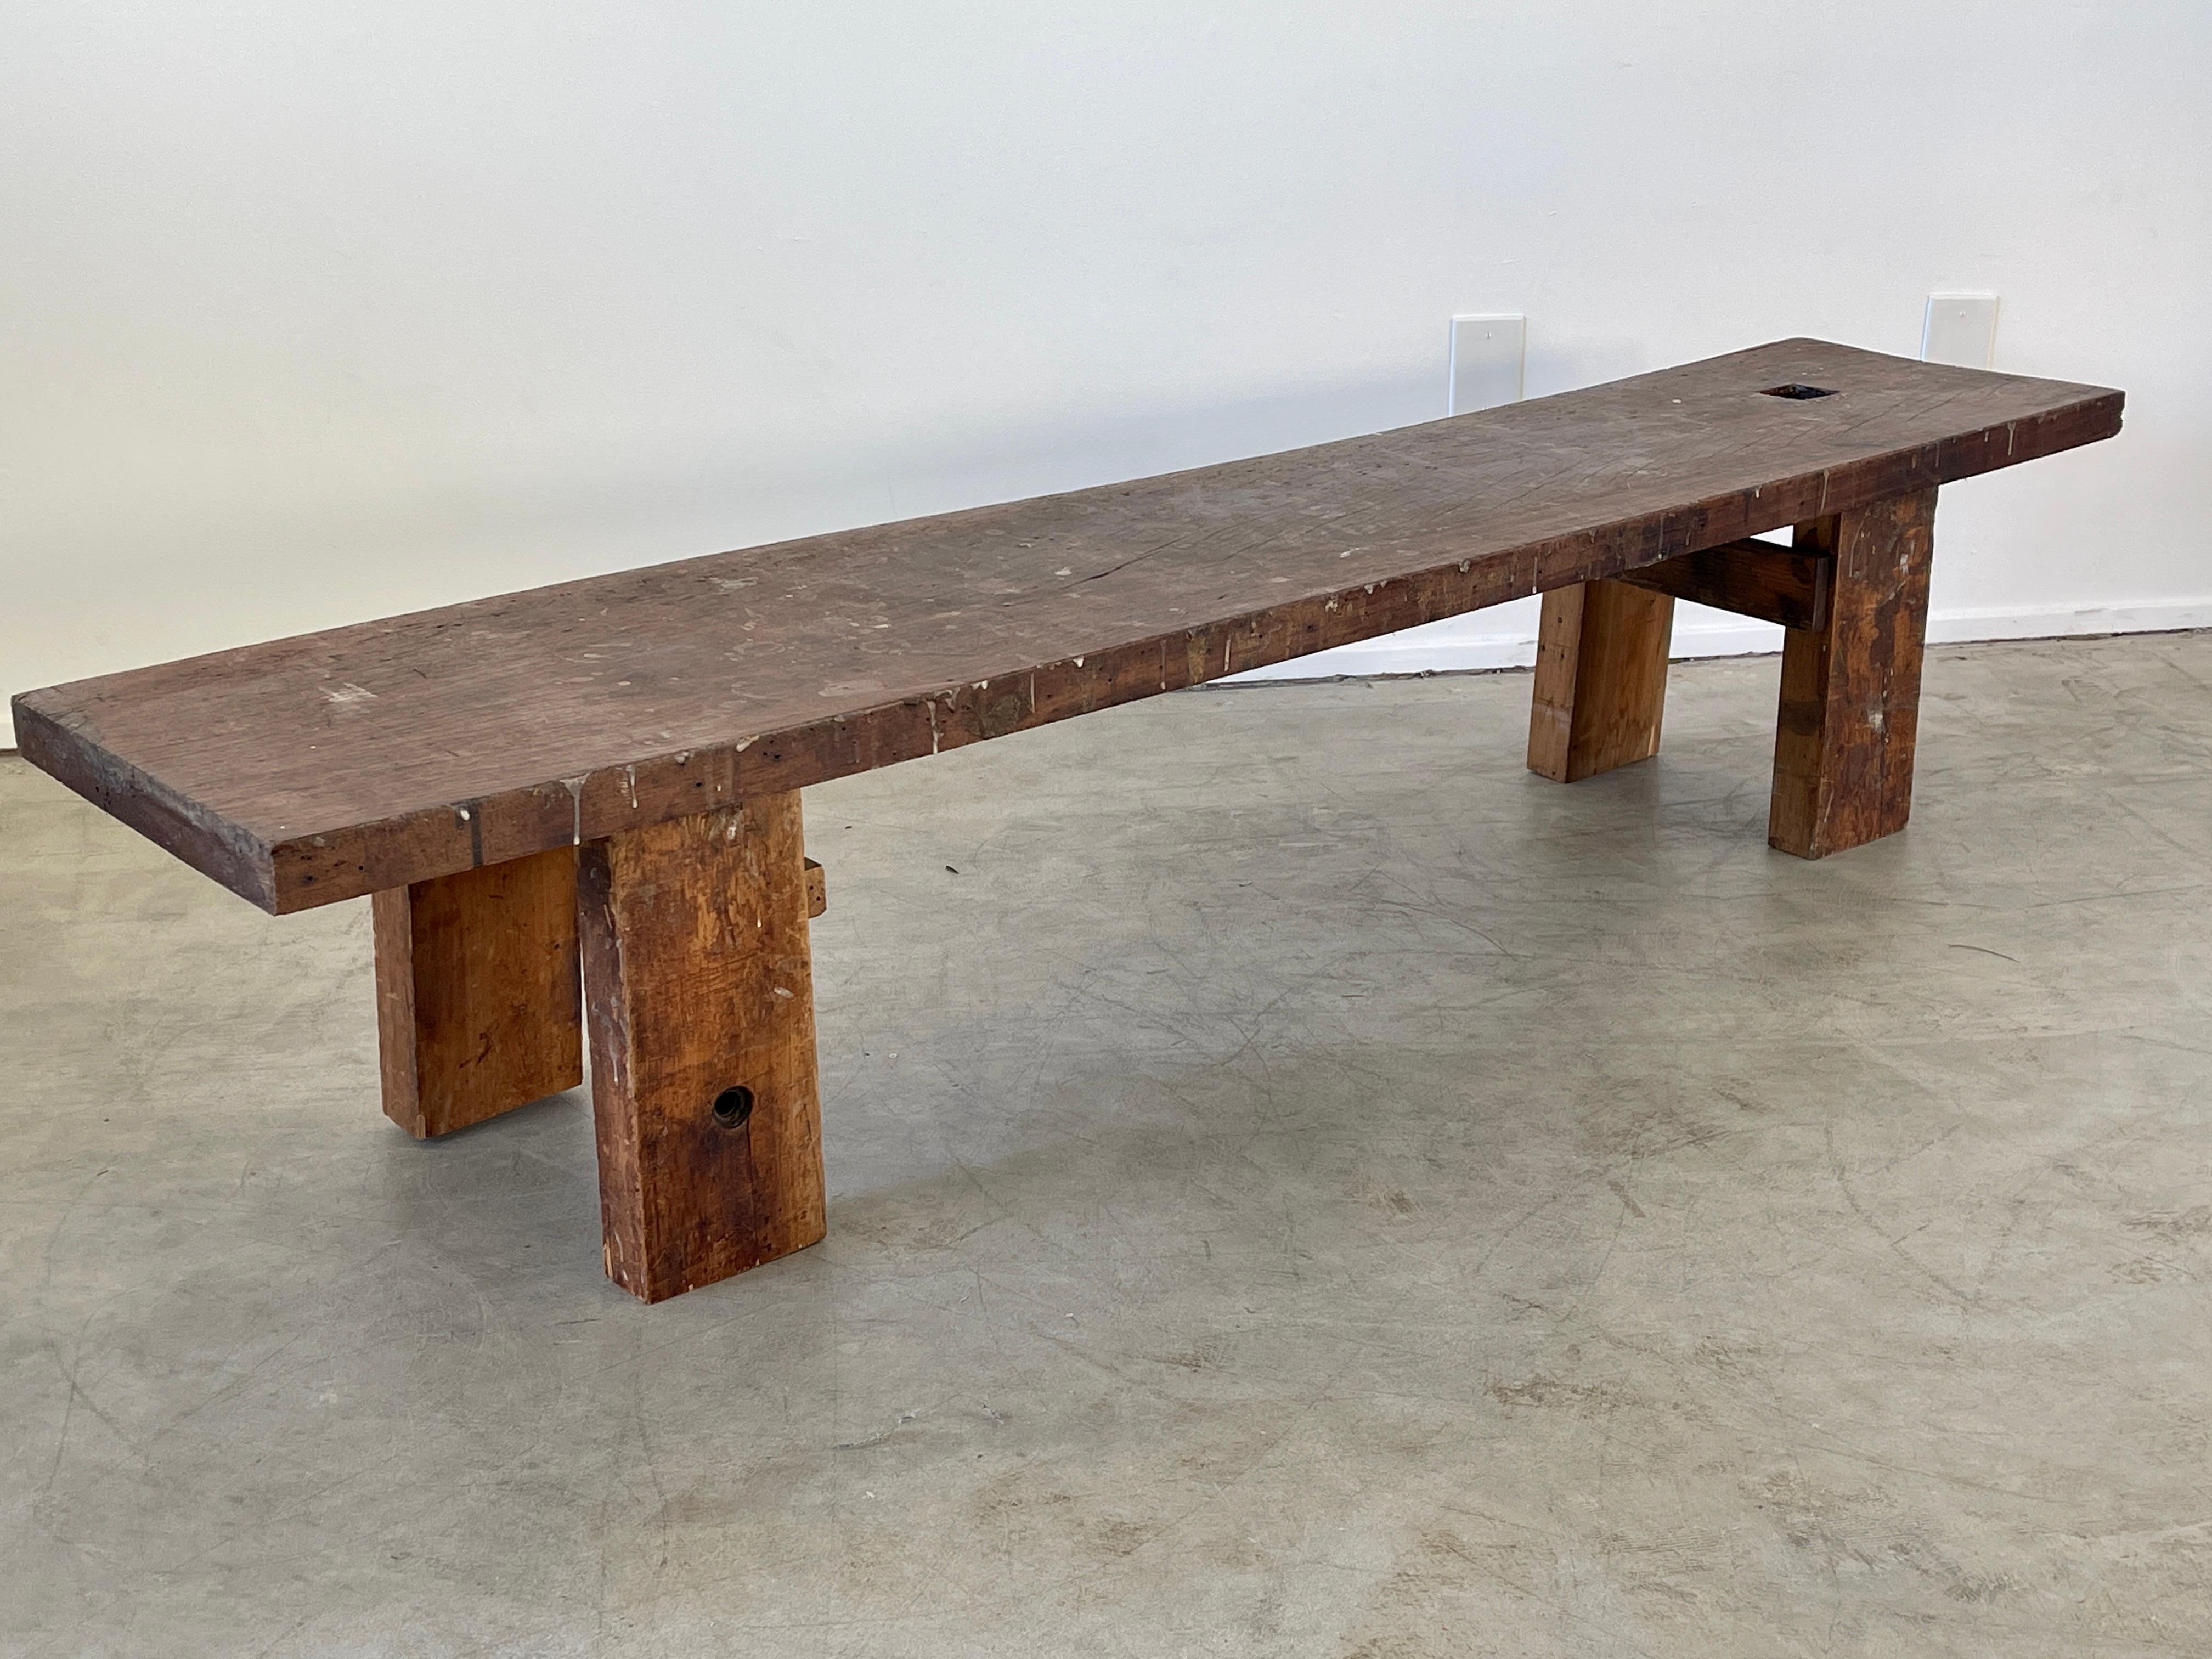 French primitive bench or coffee table with clean almost Japanese lines
Great patina with signs of paint splatter and wonderful wear.